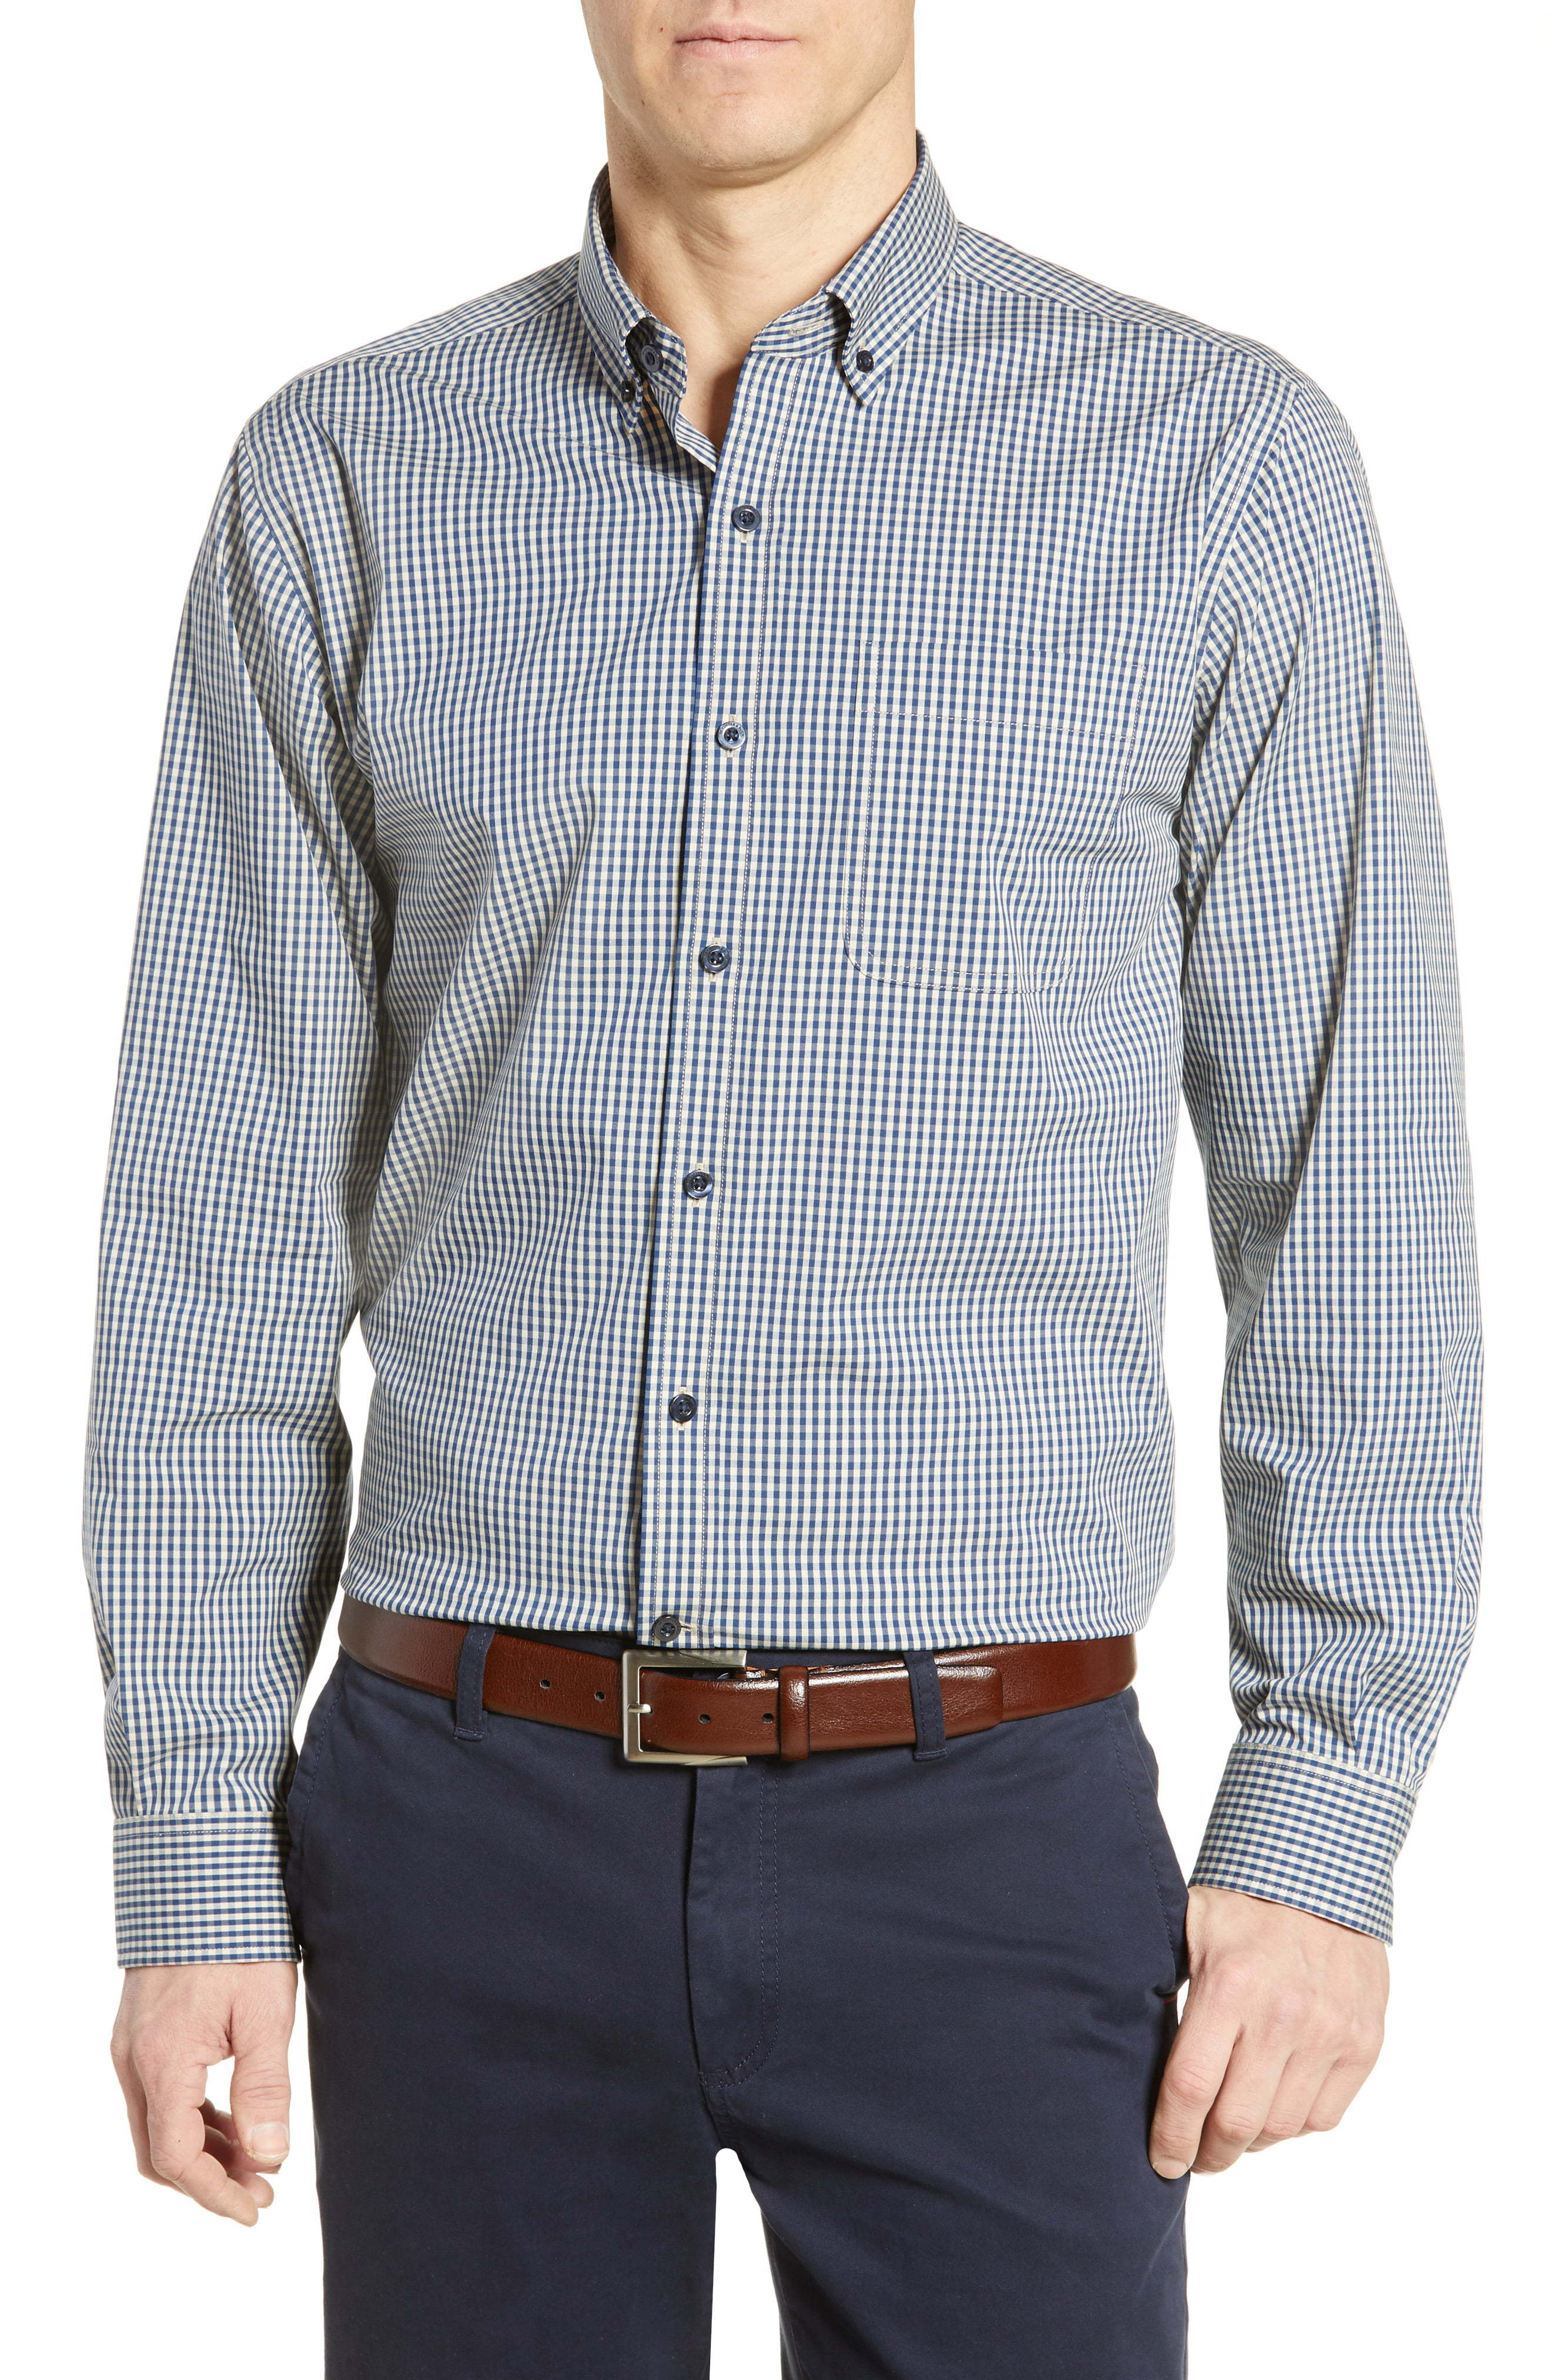 Cutter & Buck Anchor Classic Fit Gingham Shirt, $95 | Nordstrom | Lookastic